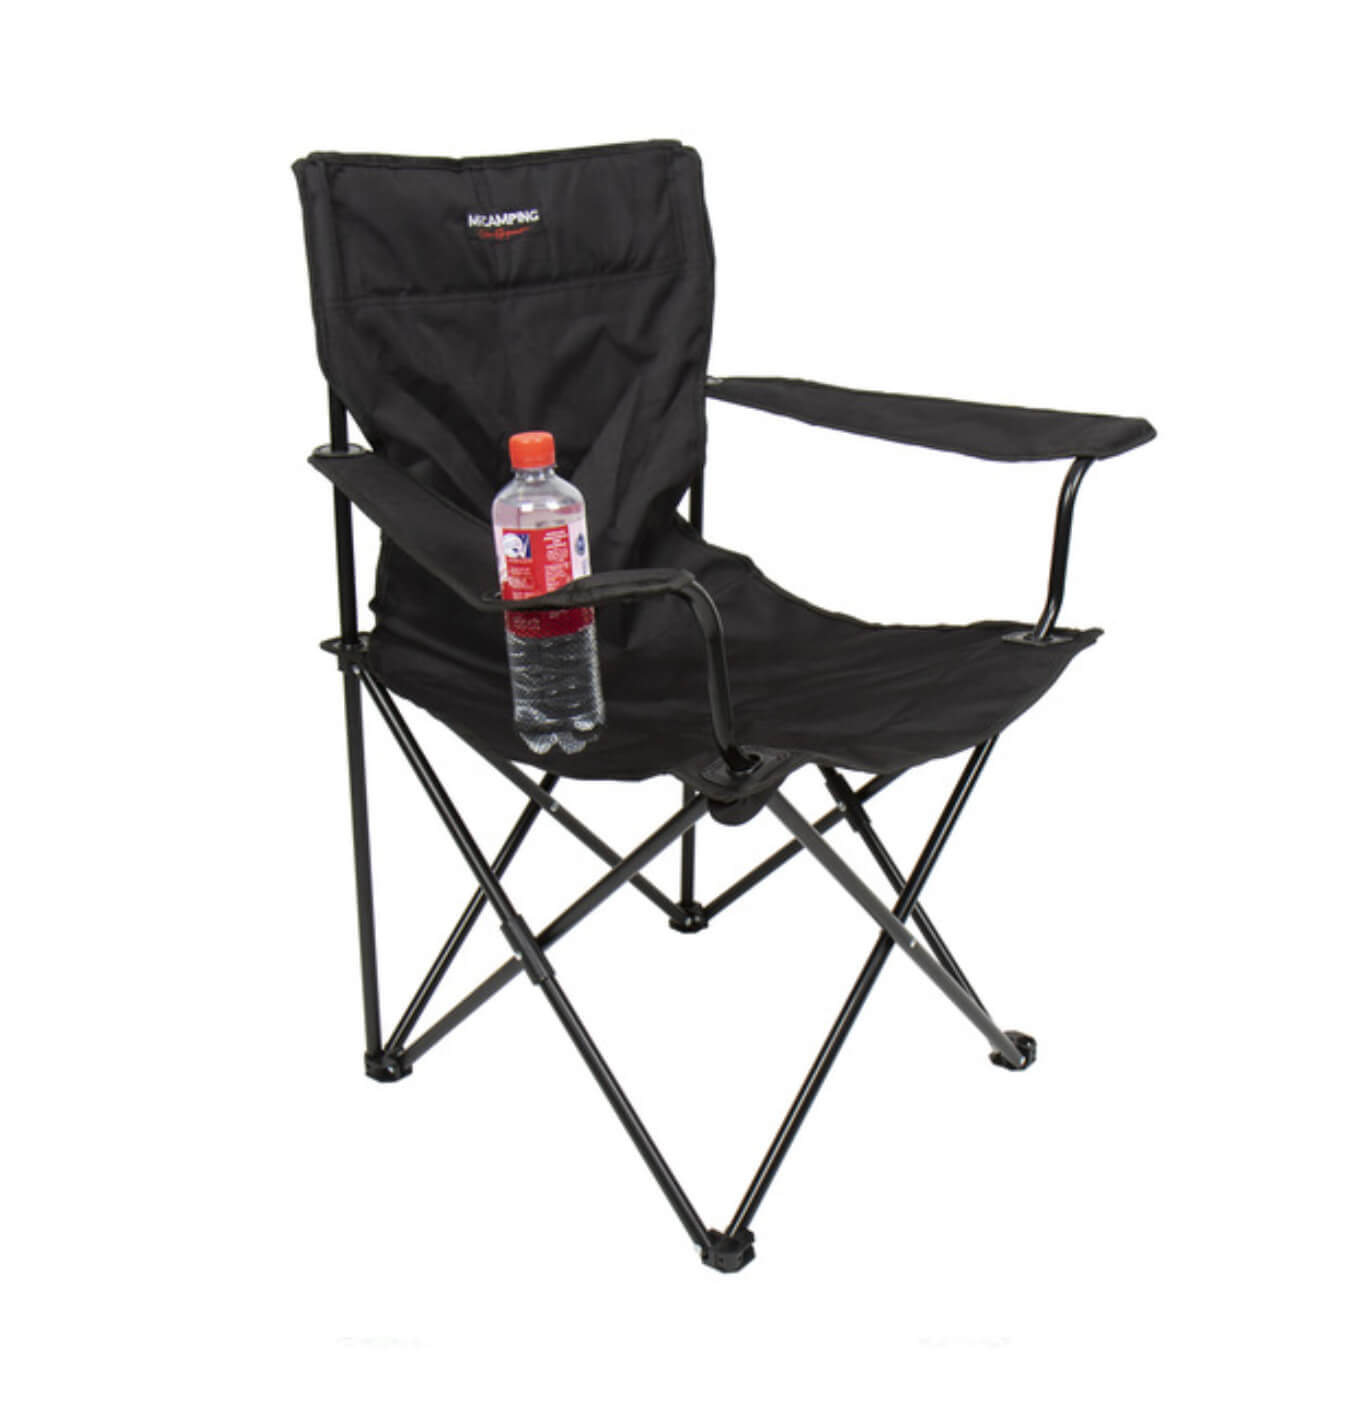 Reimo McCamping Mahalo Folding Outdoor Camping Chair